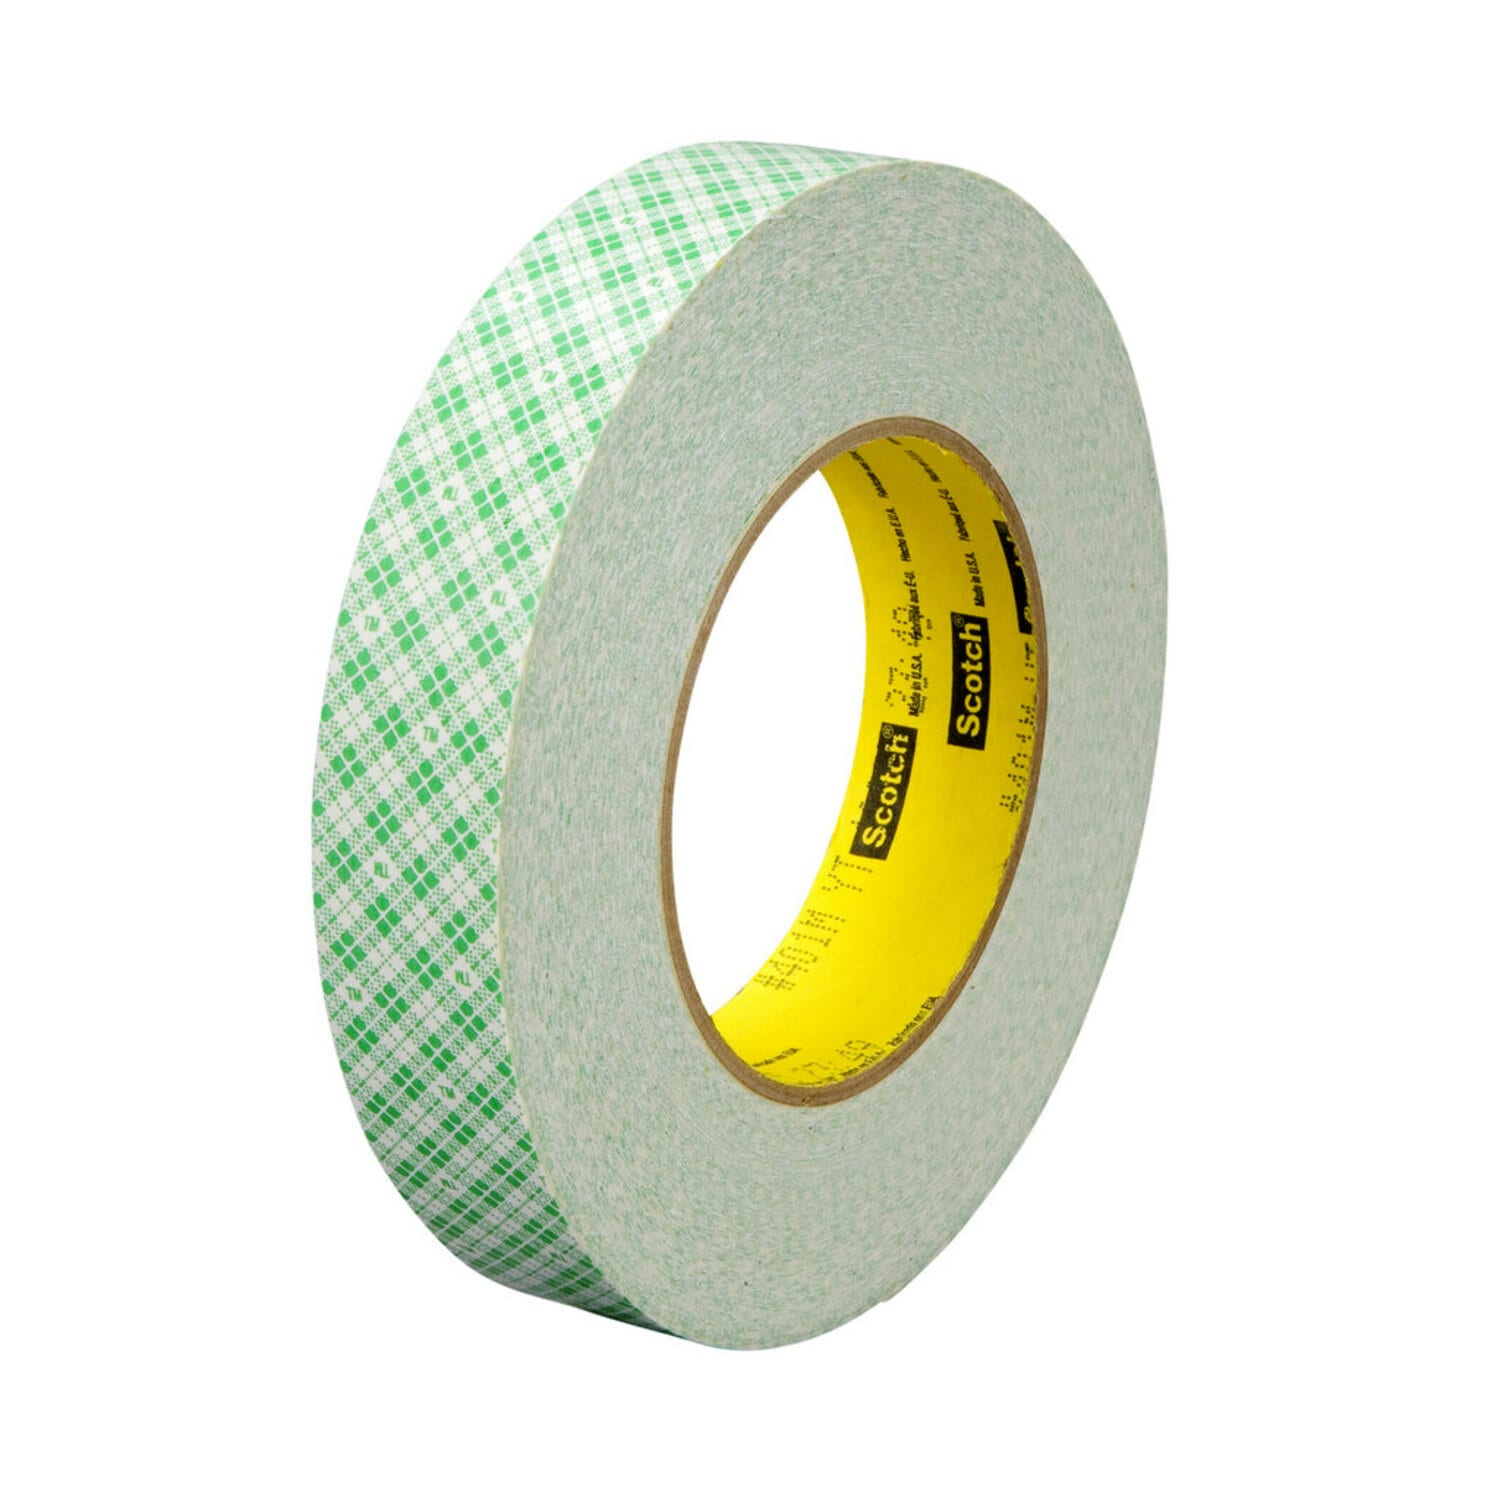 3M Double Coated Paper Tape 401M, Natural, 1 1/2 in x 36 yd, 9 Mil